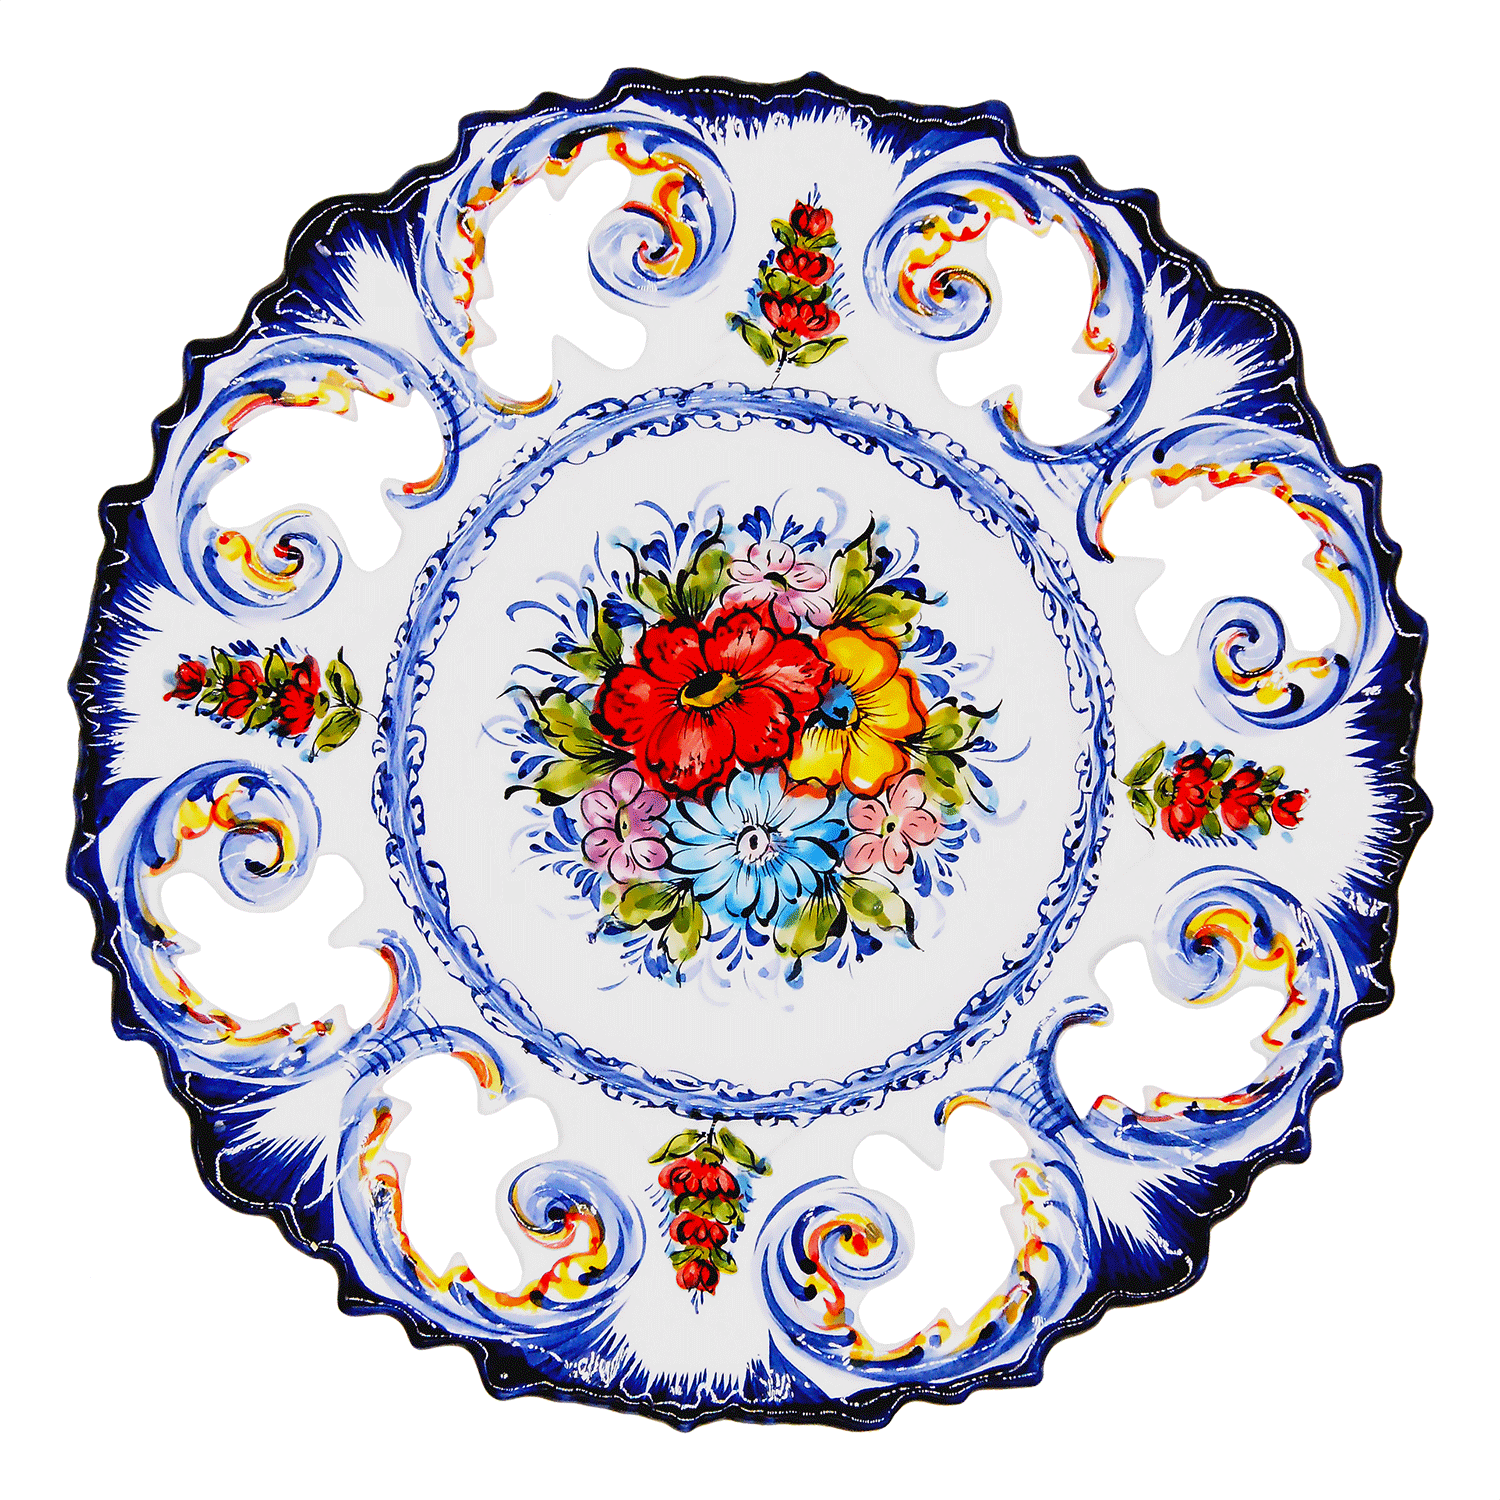 FAIREAL Hand-Painted Portuguese Pottery Ceramic Wall Hanging Plate